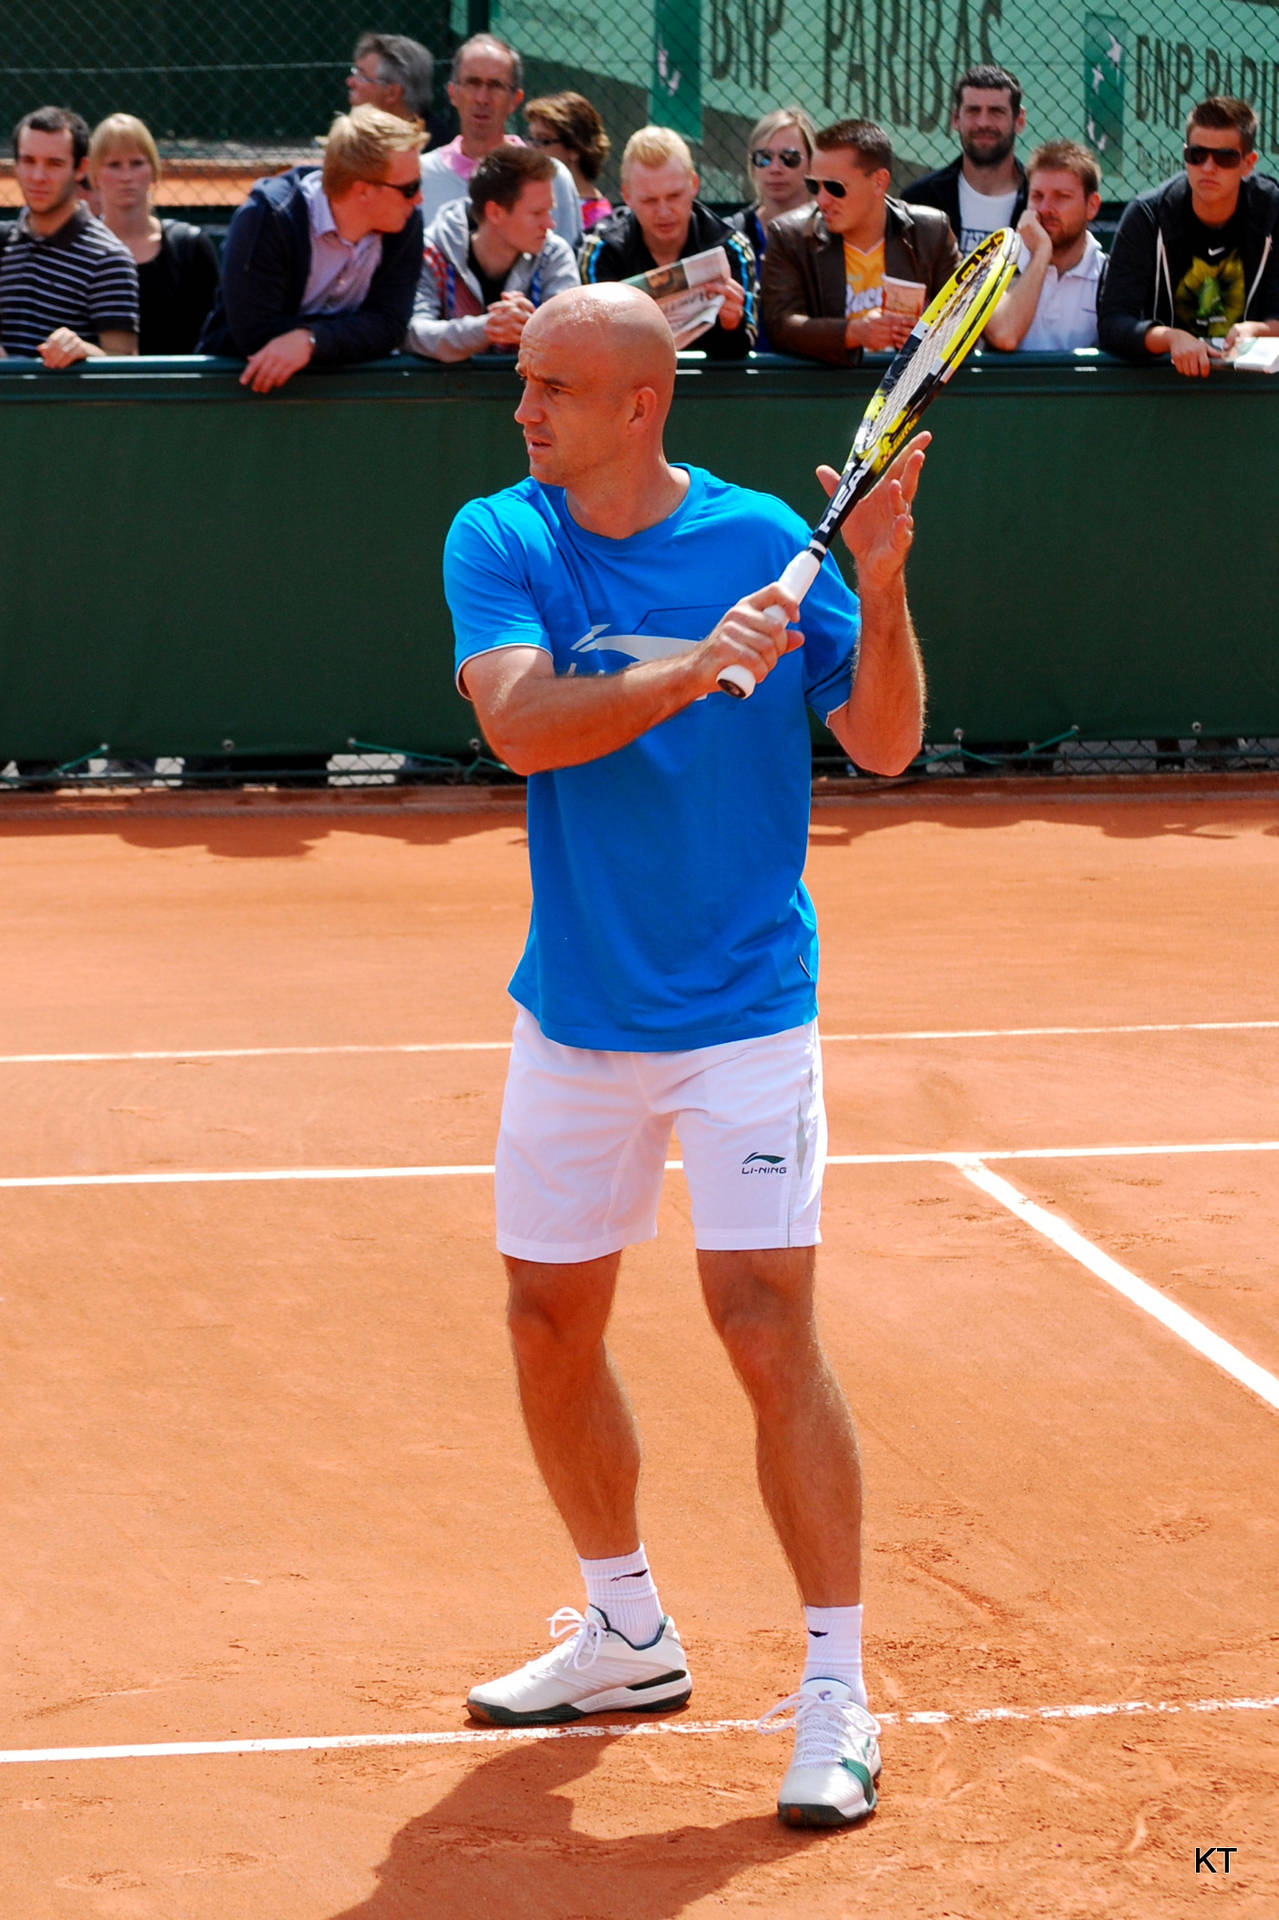 Ivan Ljubicic powerfully striking a shot on a clay court Wallpaper